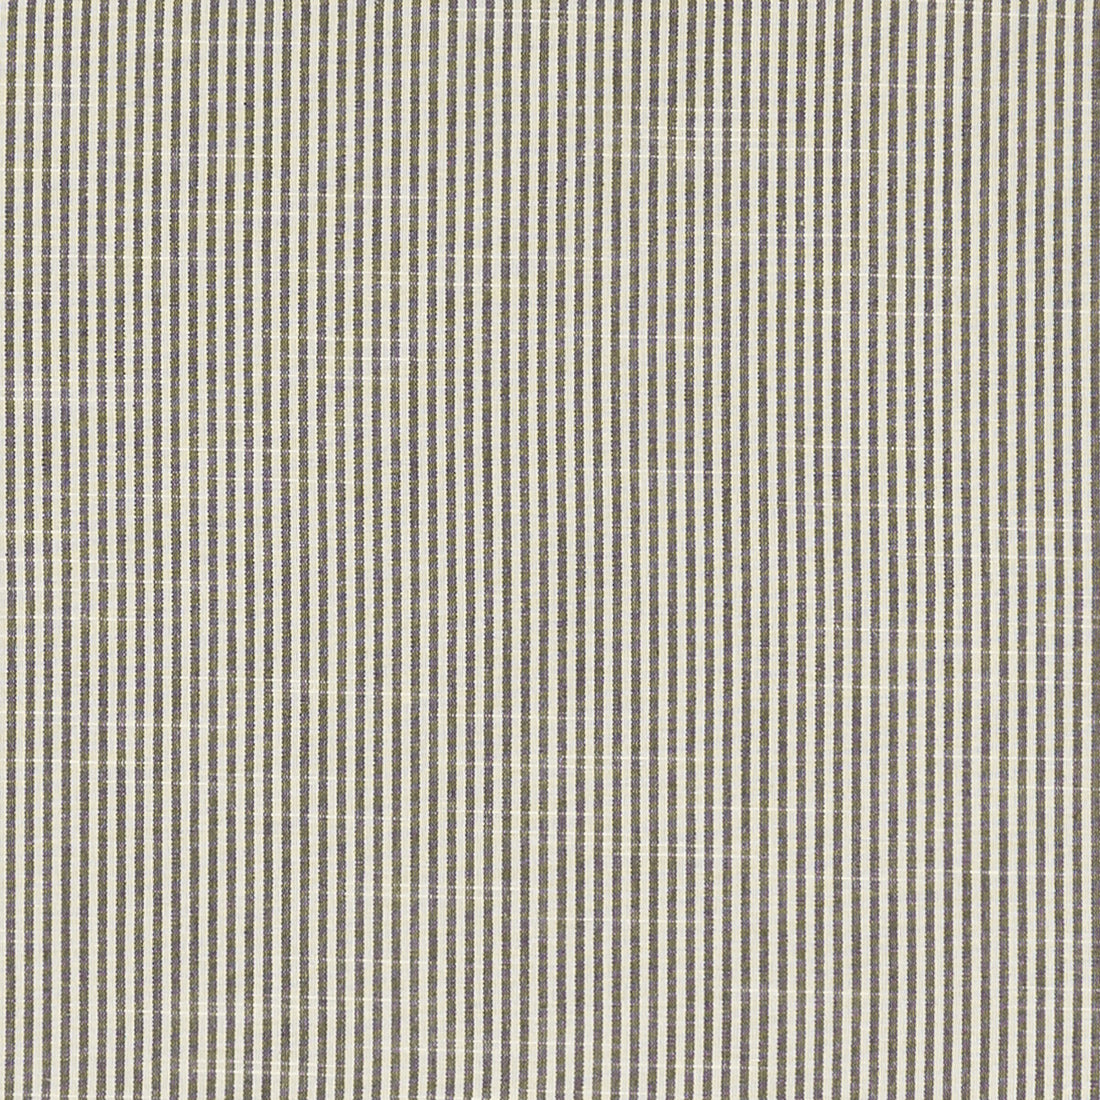 Bempton fabric in charcoal color - pattern F1307/02.CAC.0 - by Clarke And Clarke in the Bempton By Studio G For C&amp;C collection